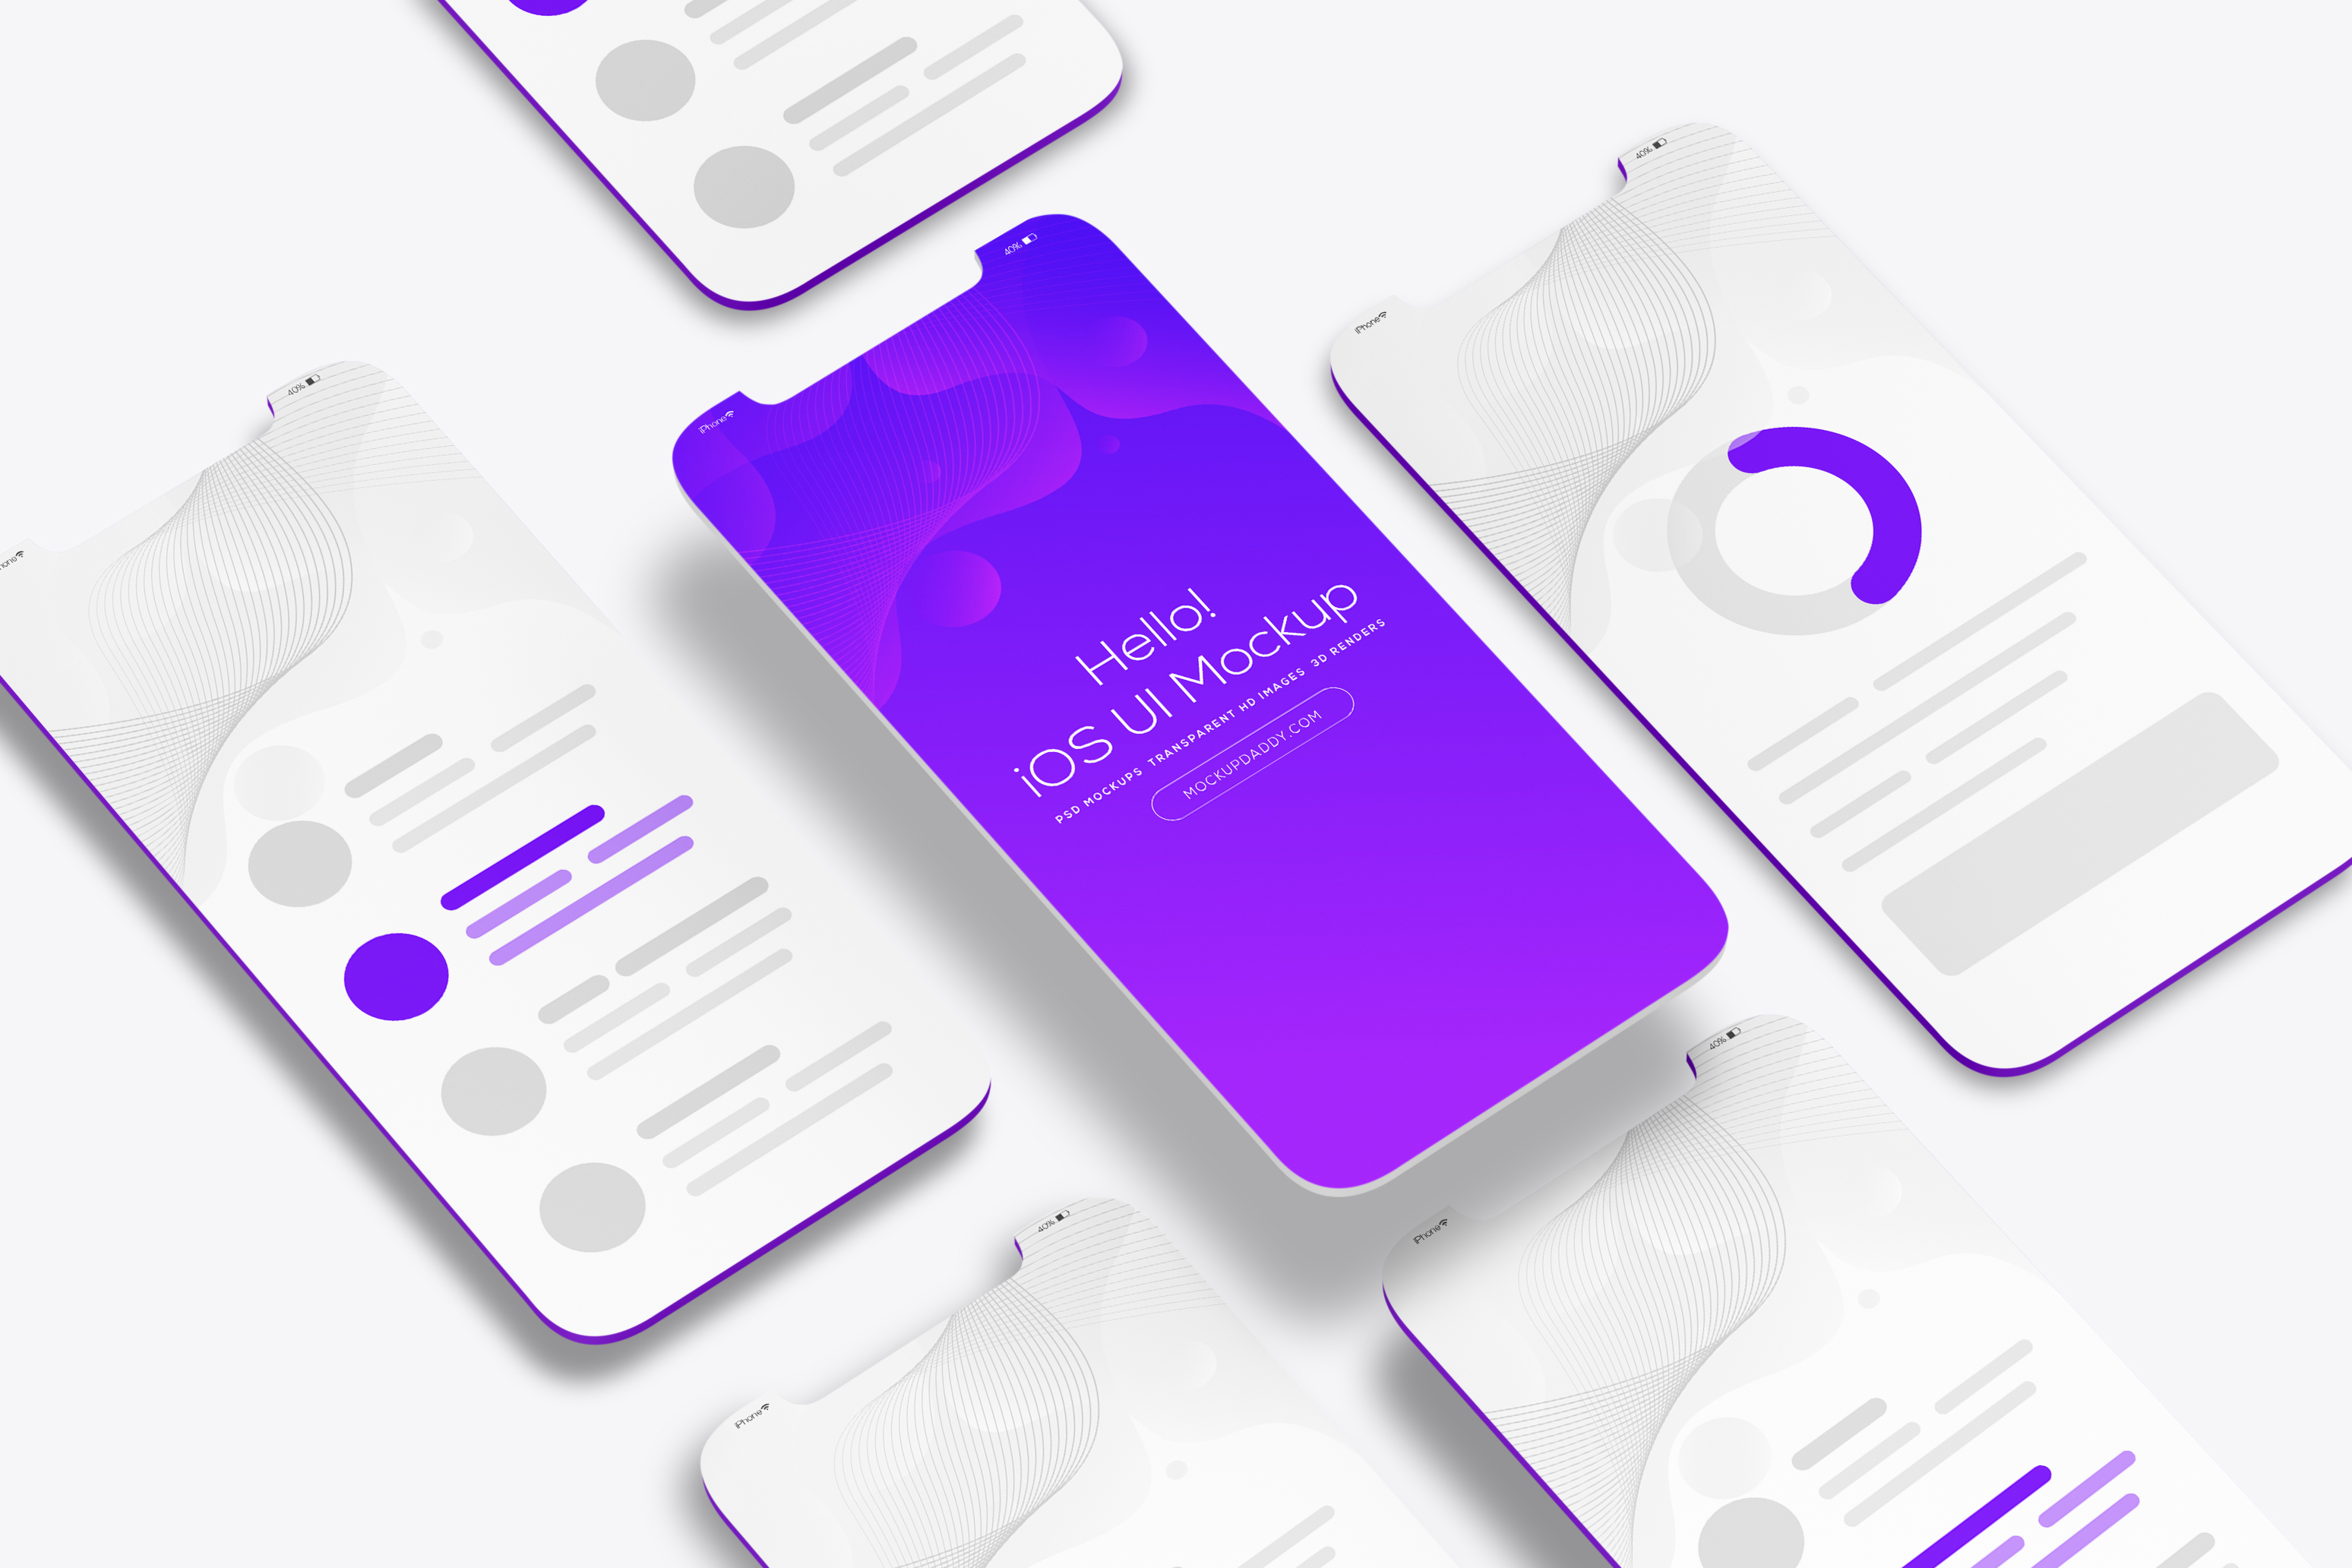 Ui Design Isometric Mockup by Anchal on Dribbble